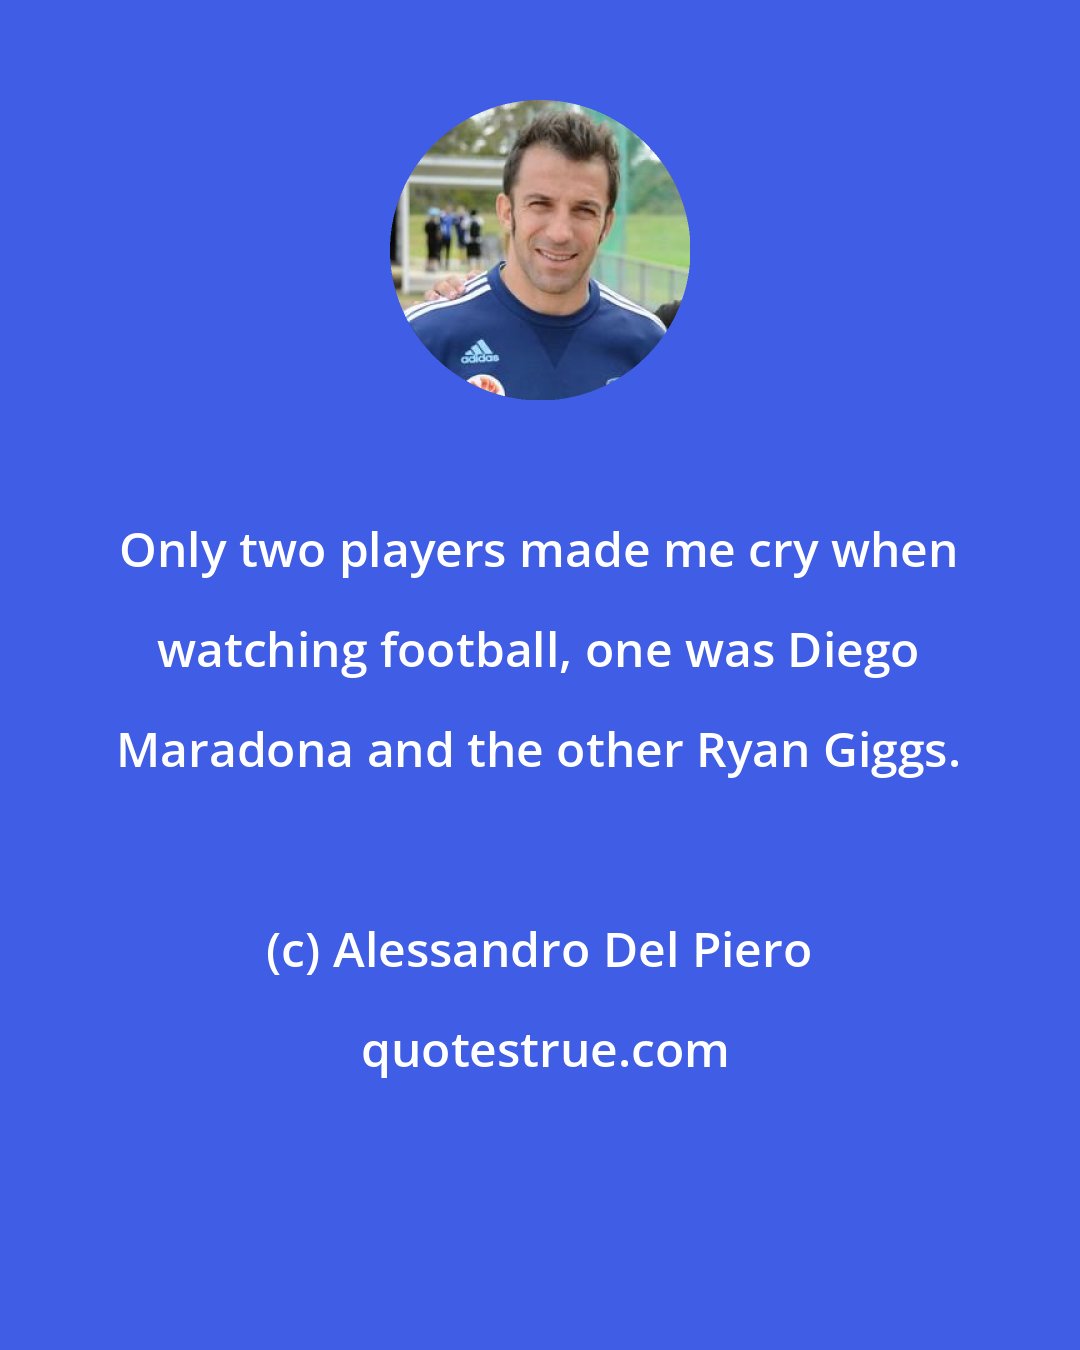 Alessandro Del Piero: Only two players made me cry when watching football, one was Diego Maradona and the other Ryan Giggs.